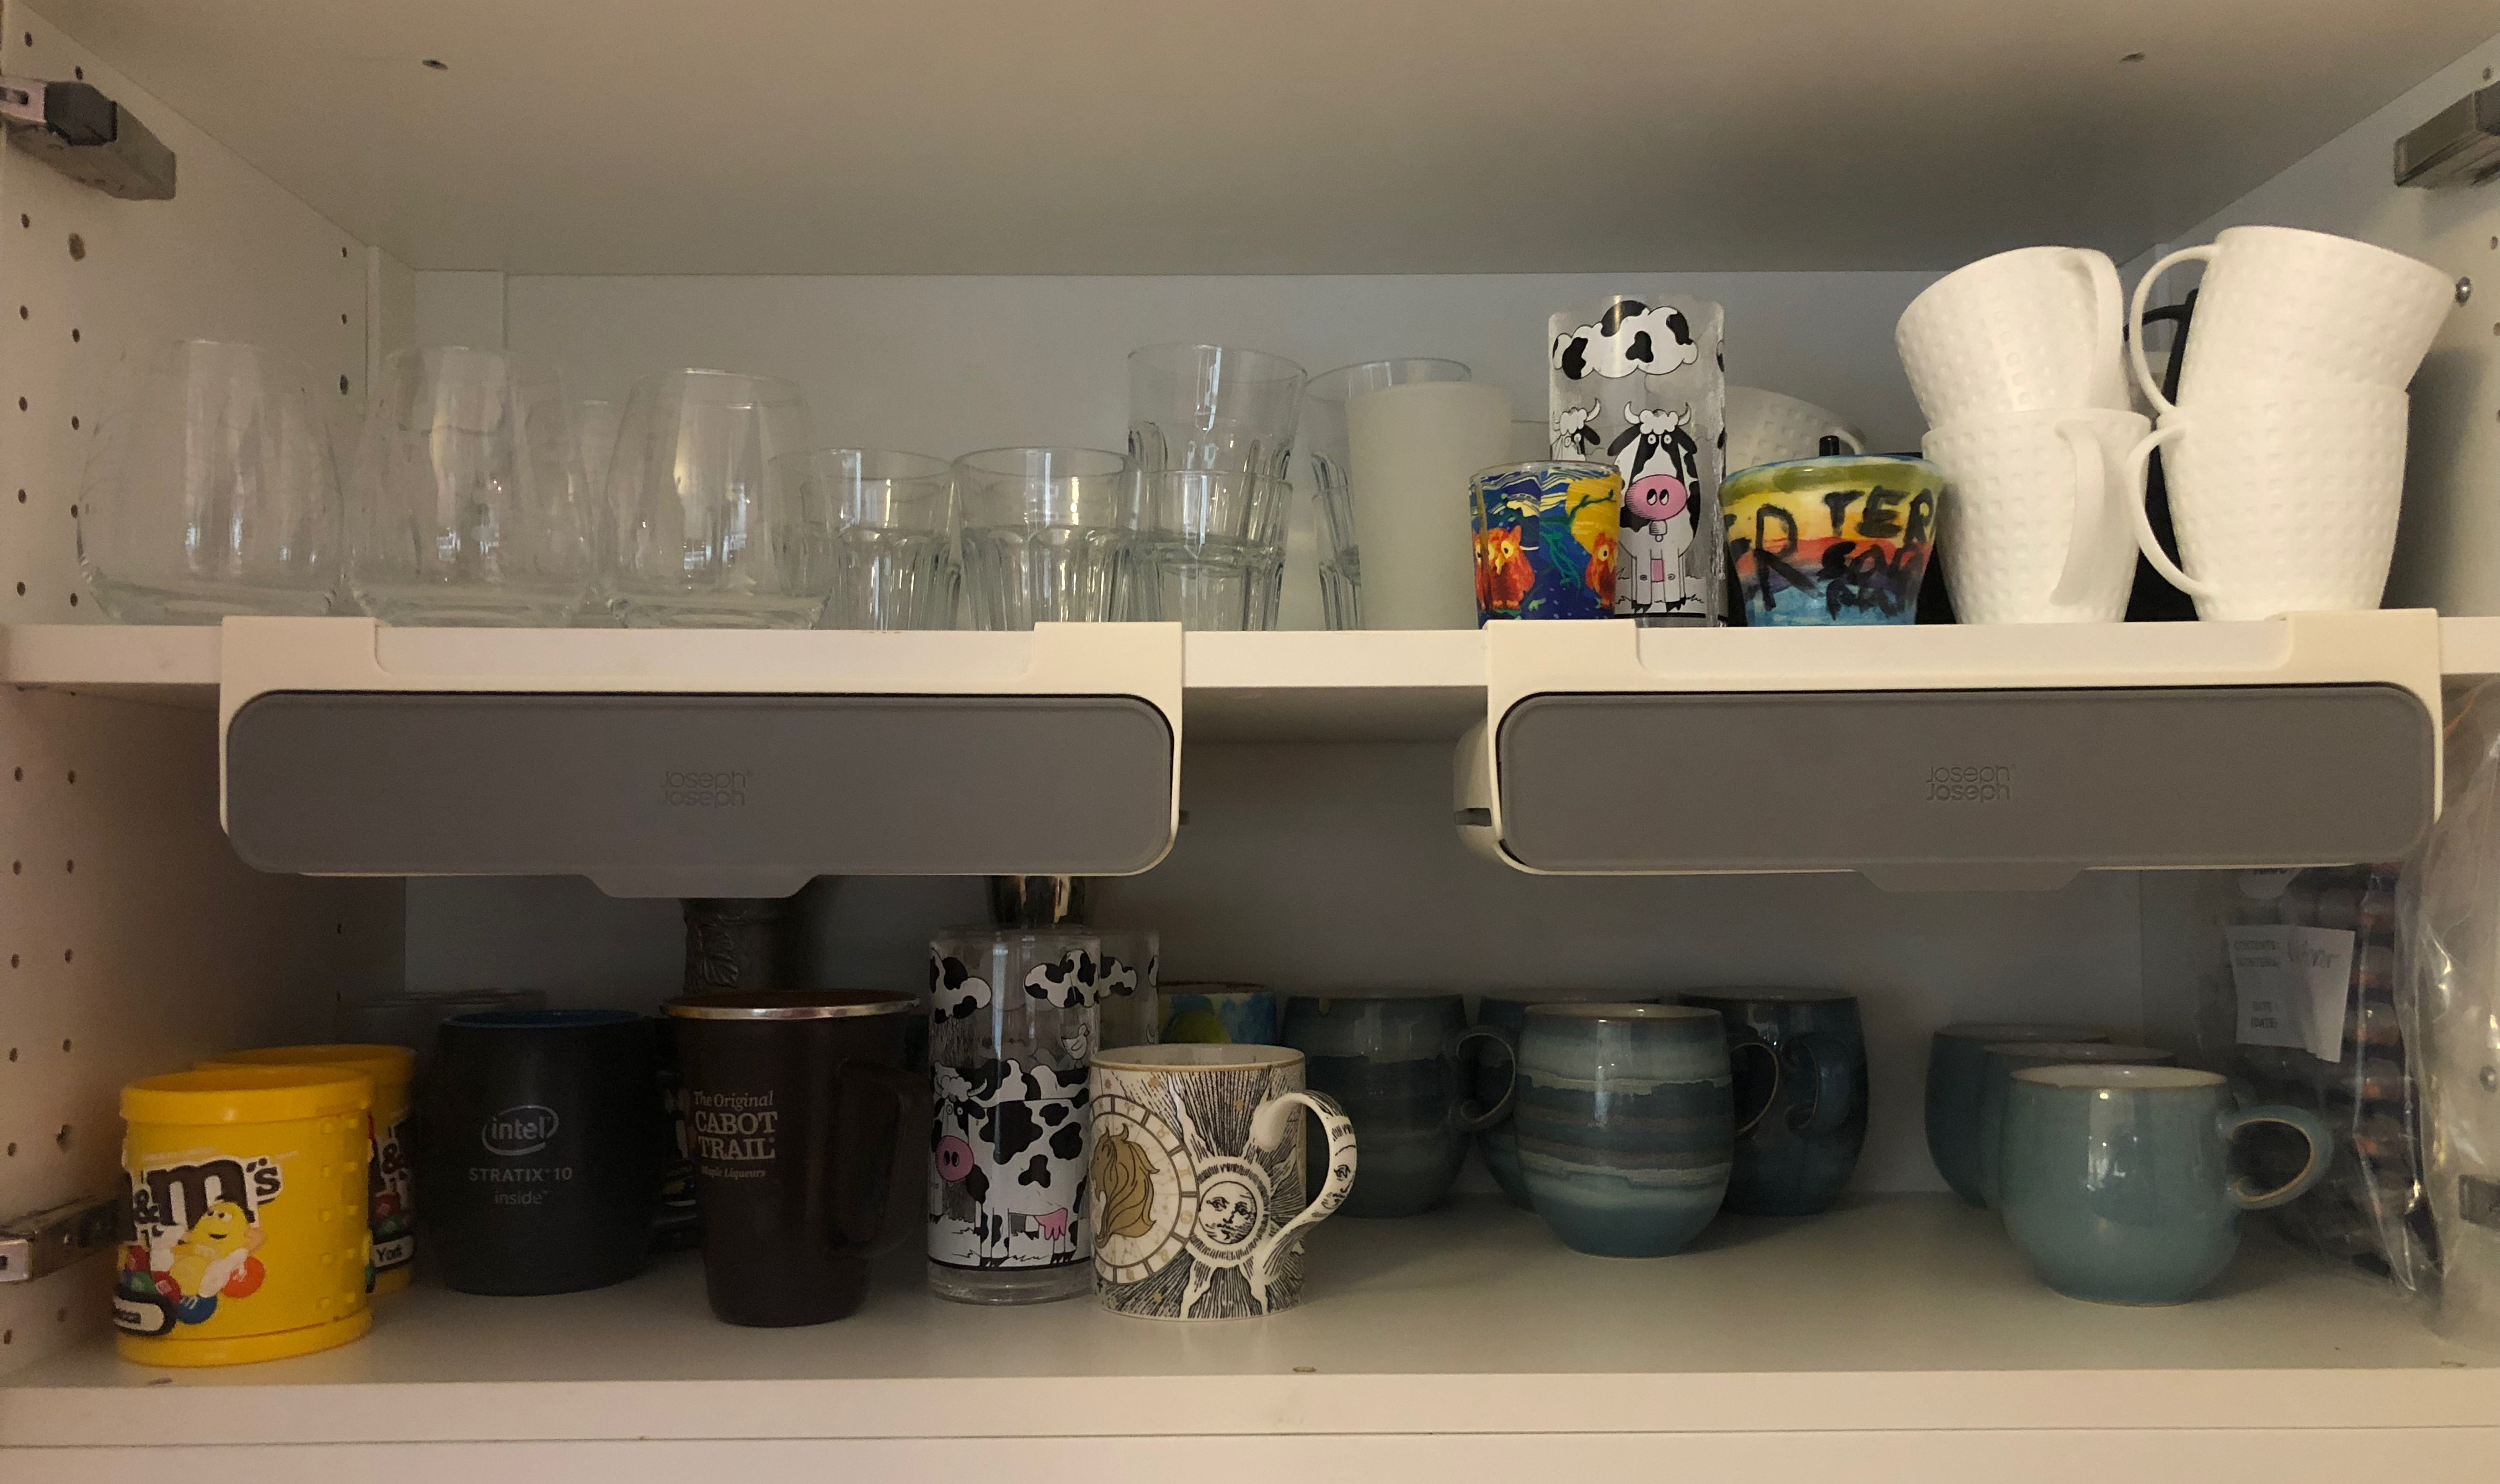 Interior of a cabinet with two shelves holding glasses and mugs. On the underside of the upper shelf are two grey-and-white rectangular containers.